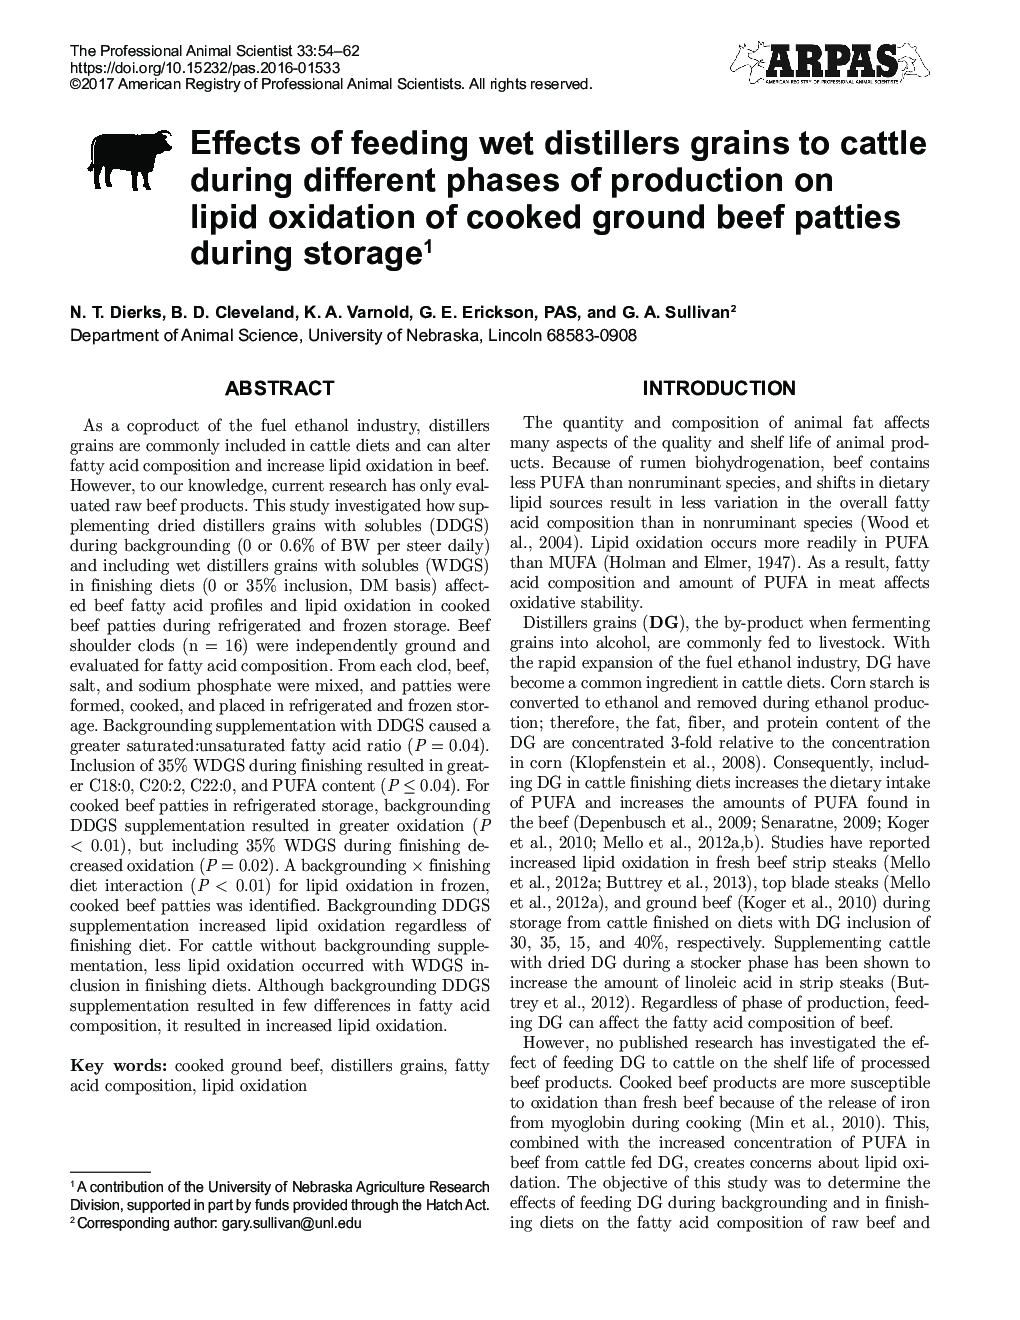 Effects of feeding wet distillers grains to cattle during different phases of production on lipid oxidation of cooked ground beef patties during storage1